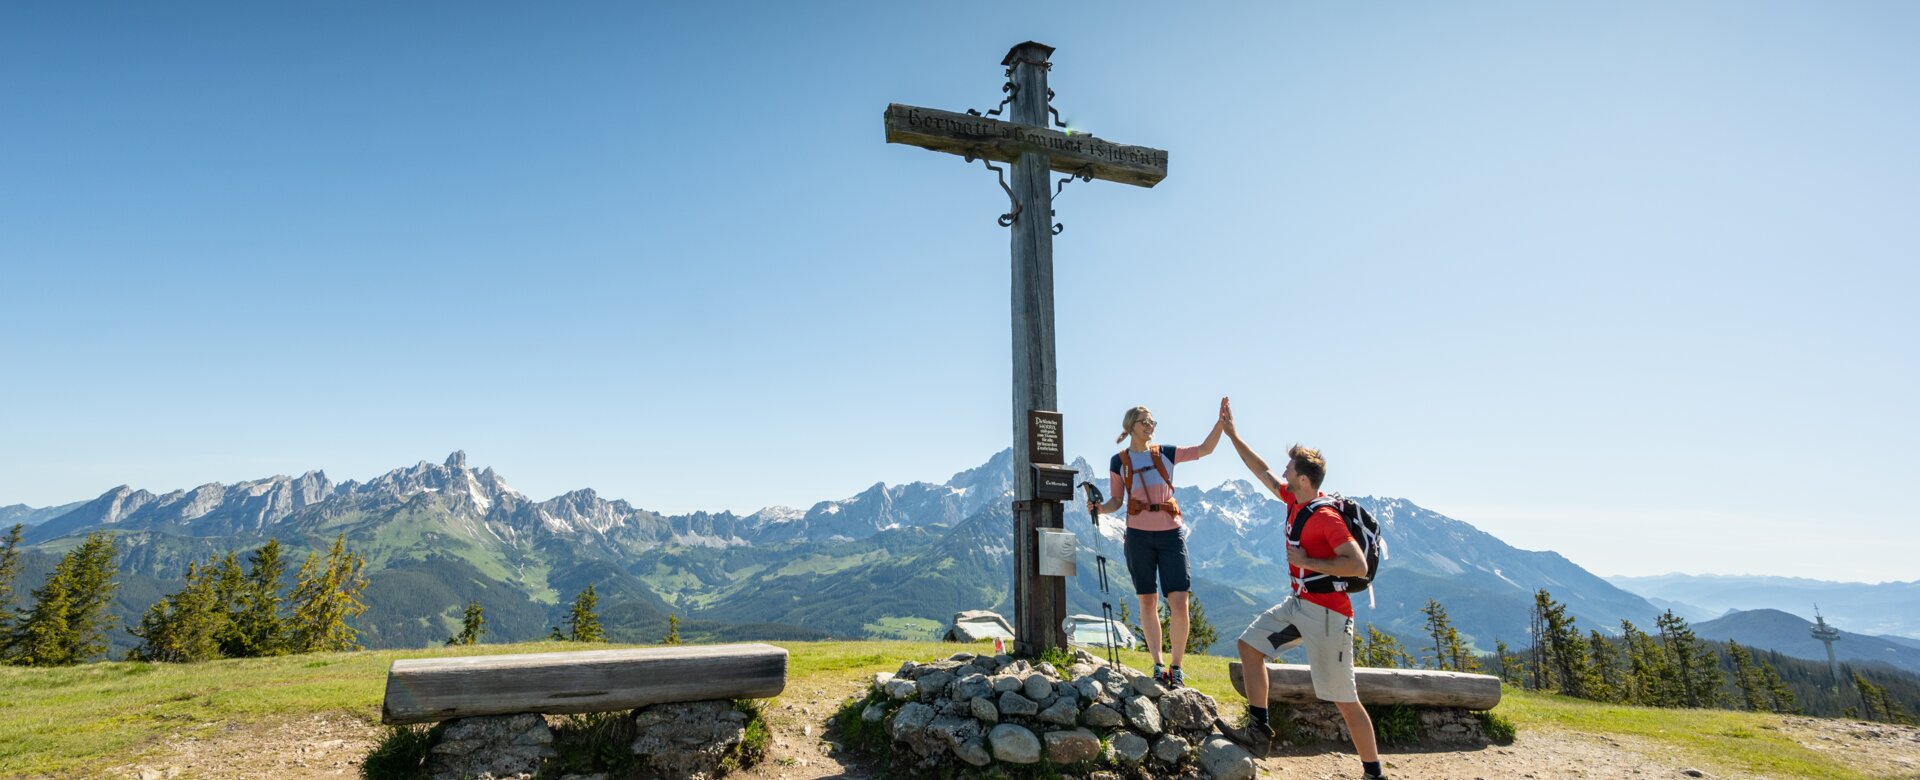 Two people stand on a plateau by a summit cross and give each other a high five | © Tourismusverband Radstadt/Lorenz Masser